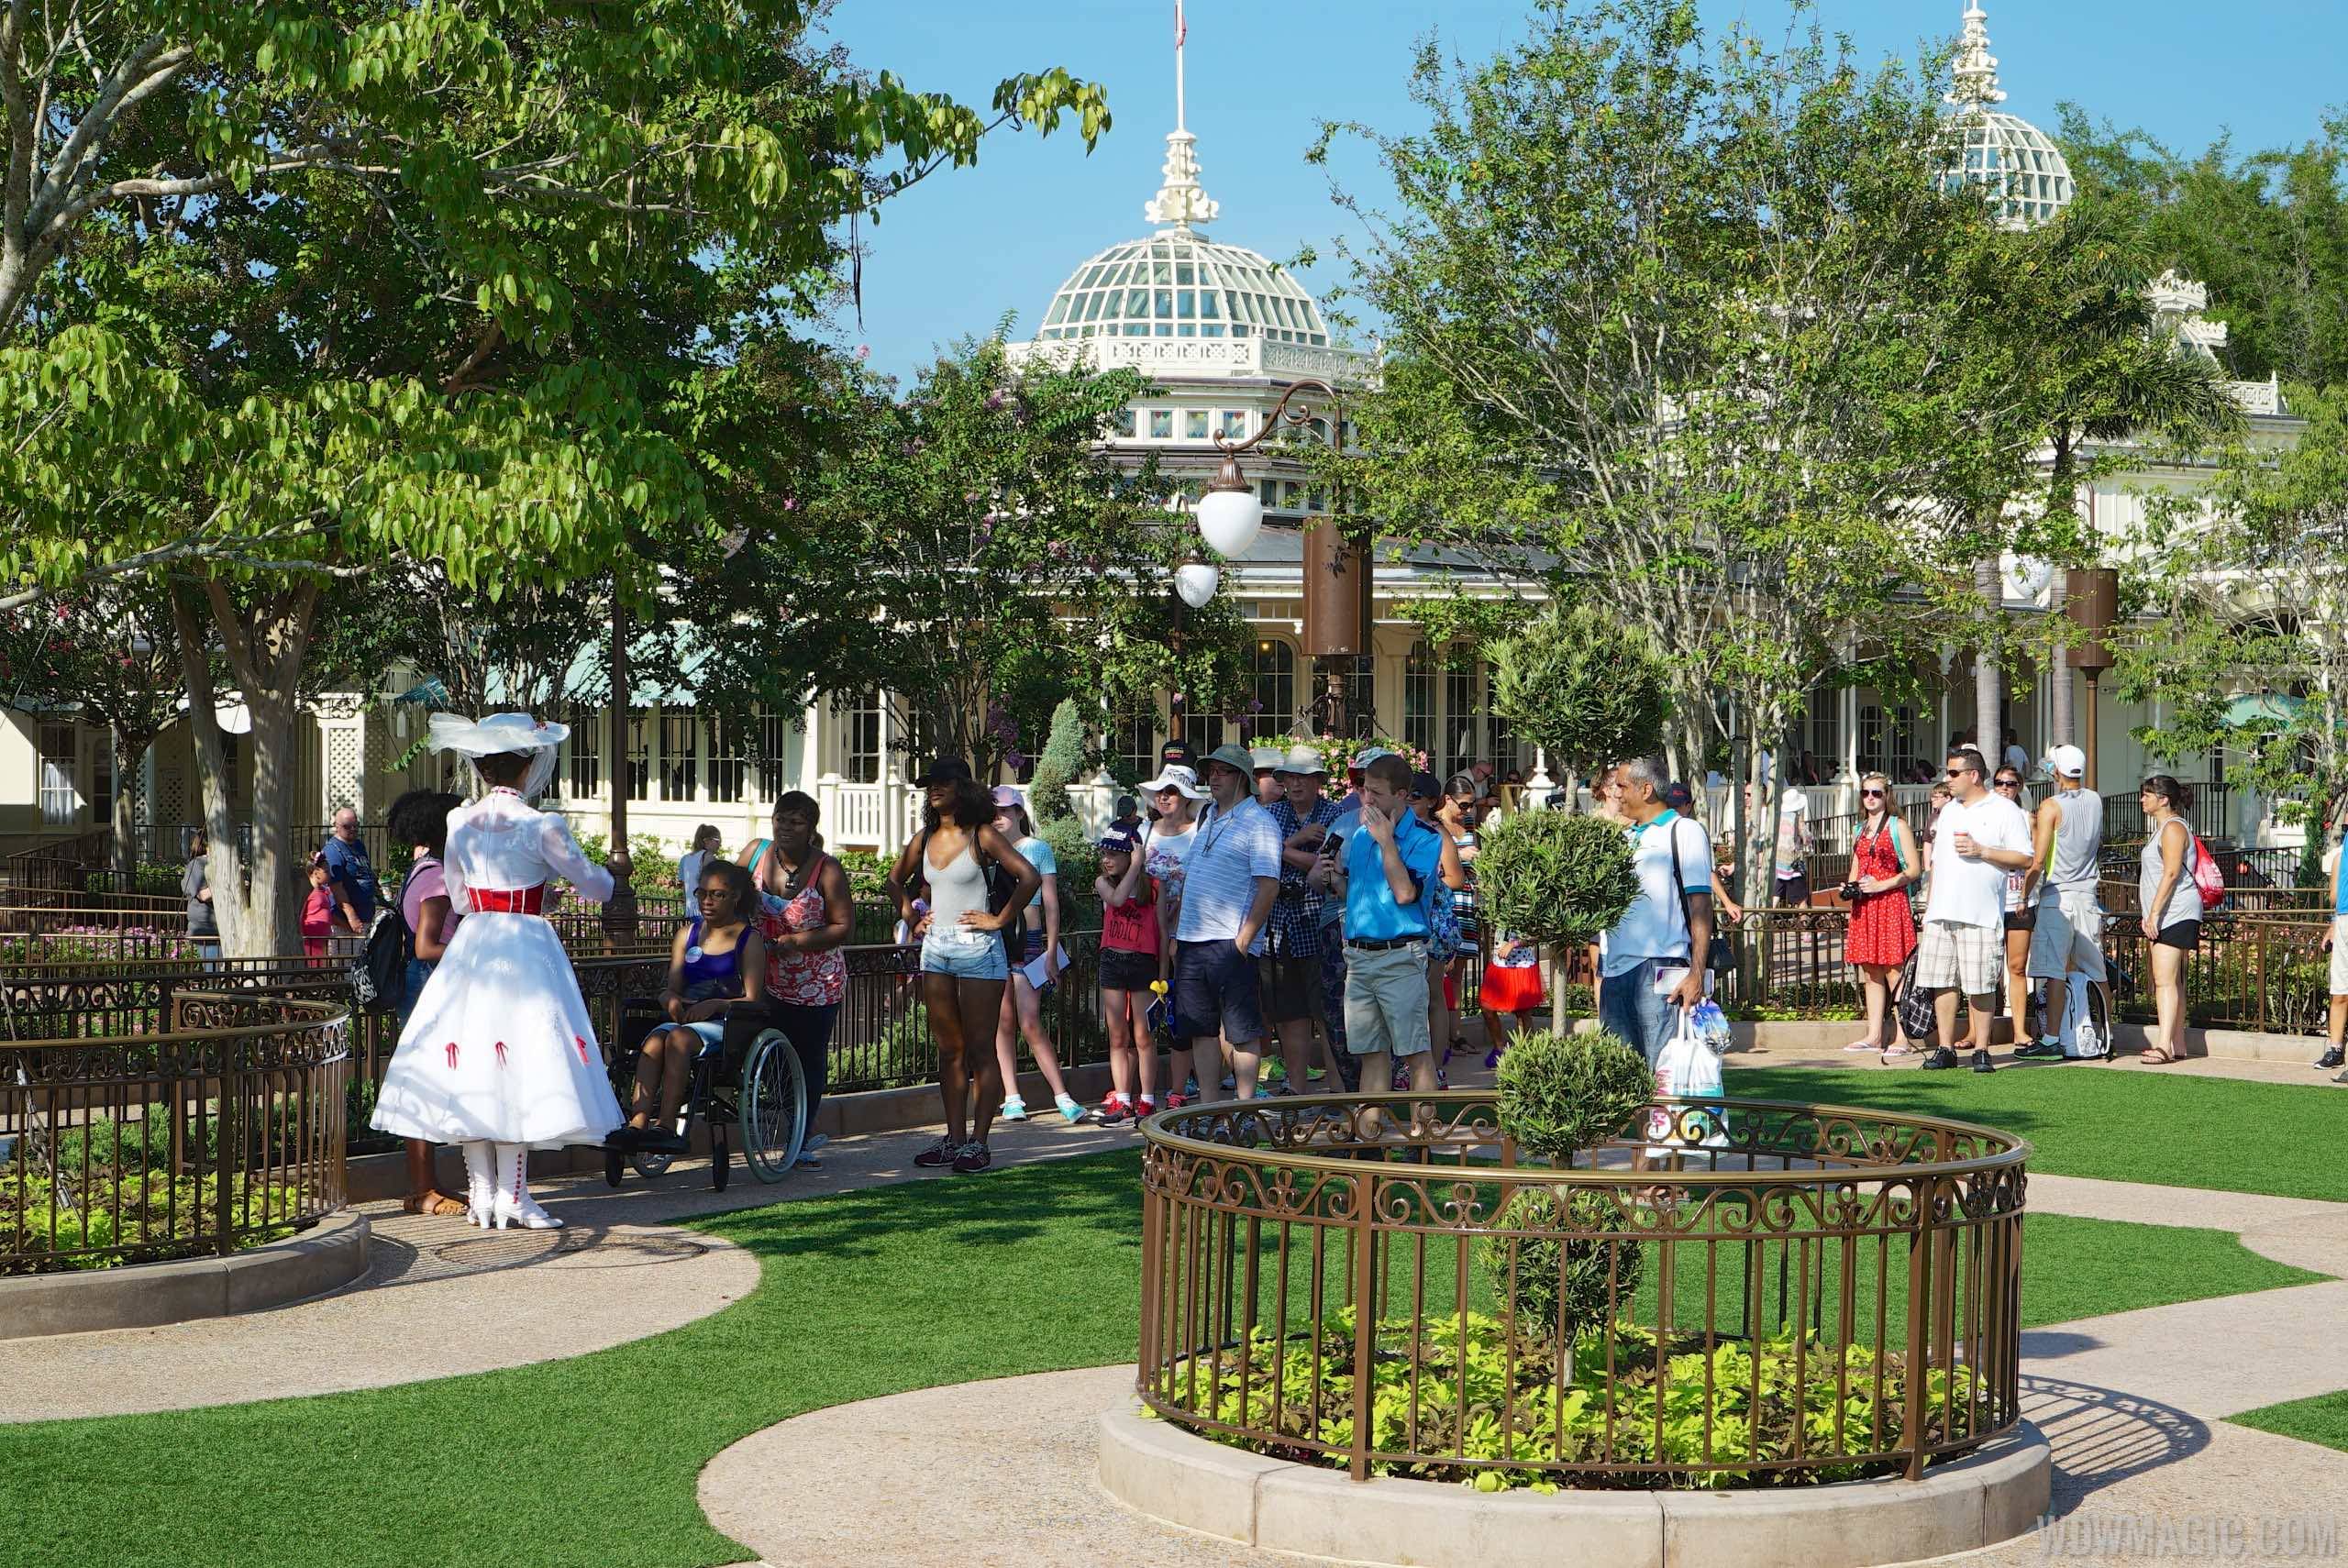 Mary Poppins Plaza Gardens West meet and greet